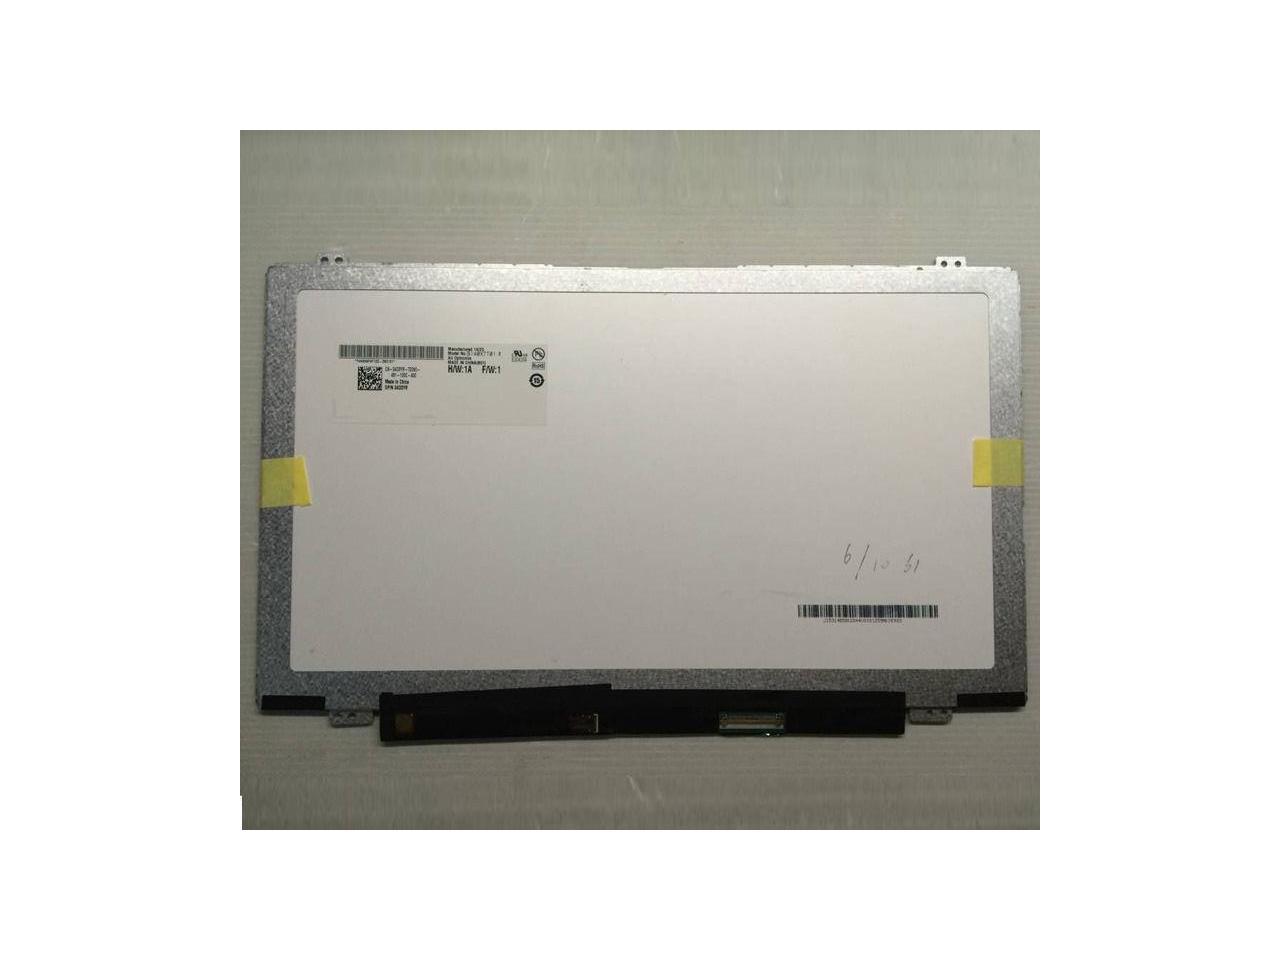 Sold By Wikiparts B140XTT01.0 B140XTT01.0 H//W:1A F//W:2 Laptop Glossy Display Panel with 40 Pins Connector New 14 LED LCD Screen Compatible with P//N